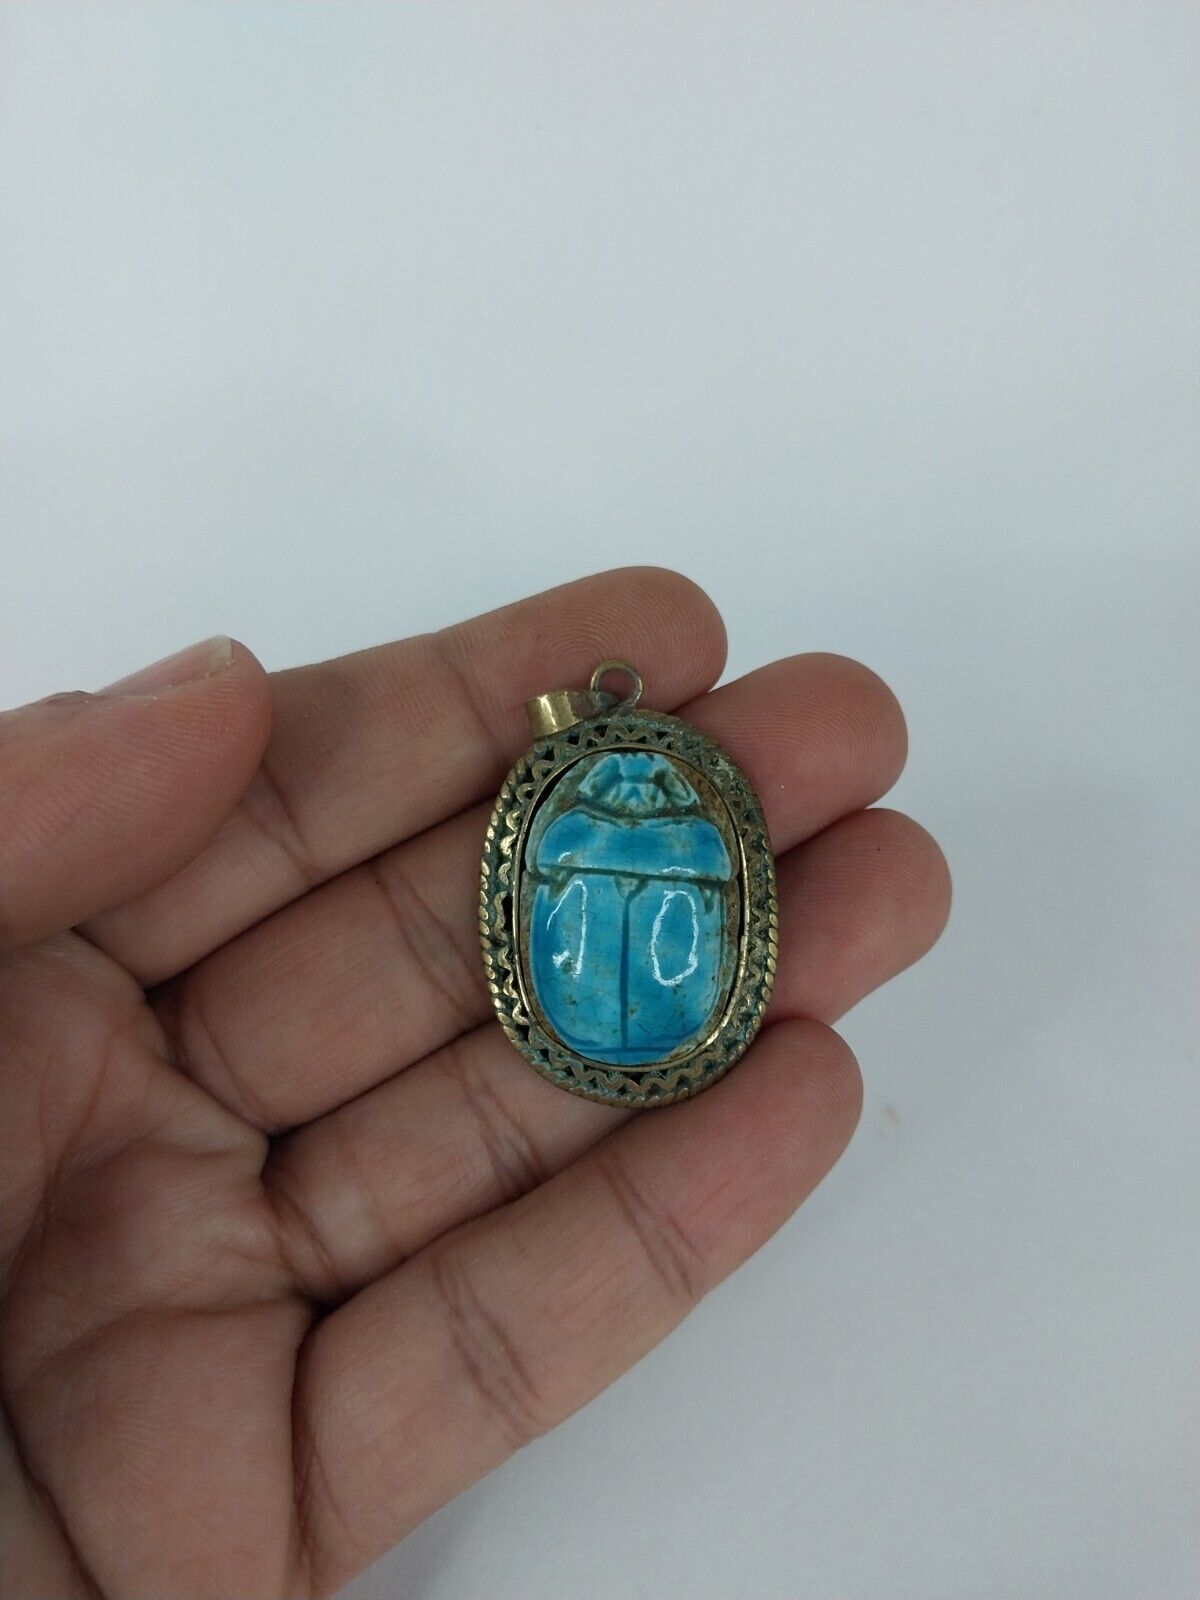 RARE ANTIQUE ANCIENT EGYPTIAN Small Scarab Blue Stone Carving Pendant Necklace